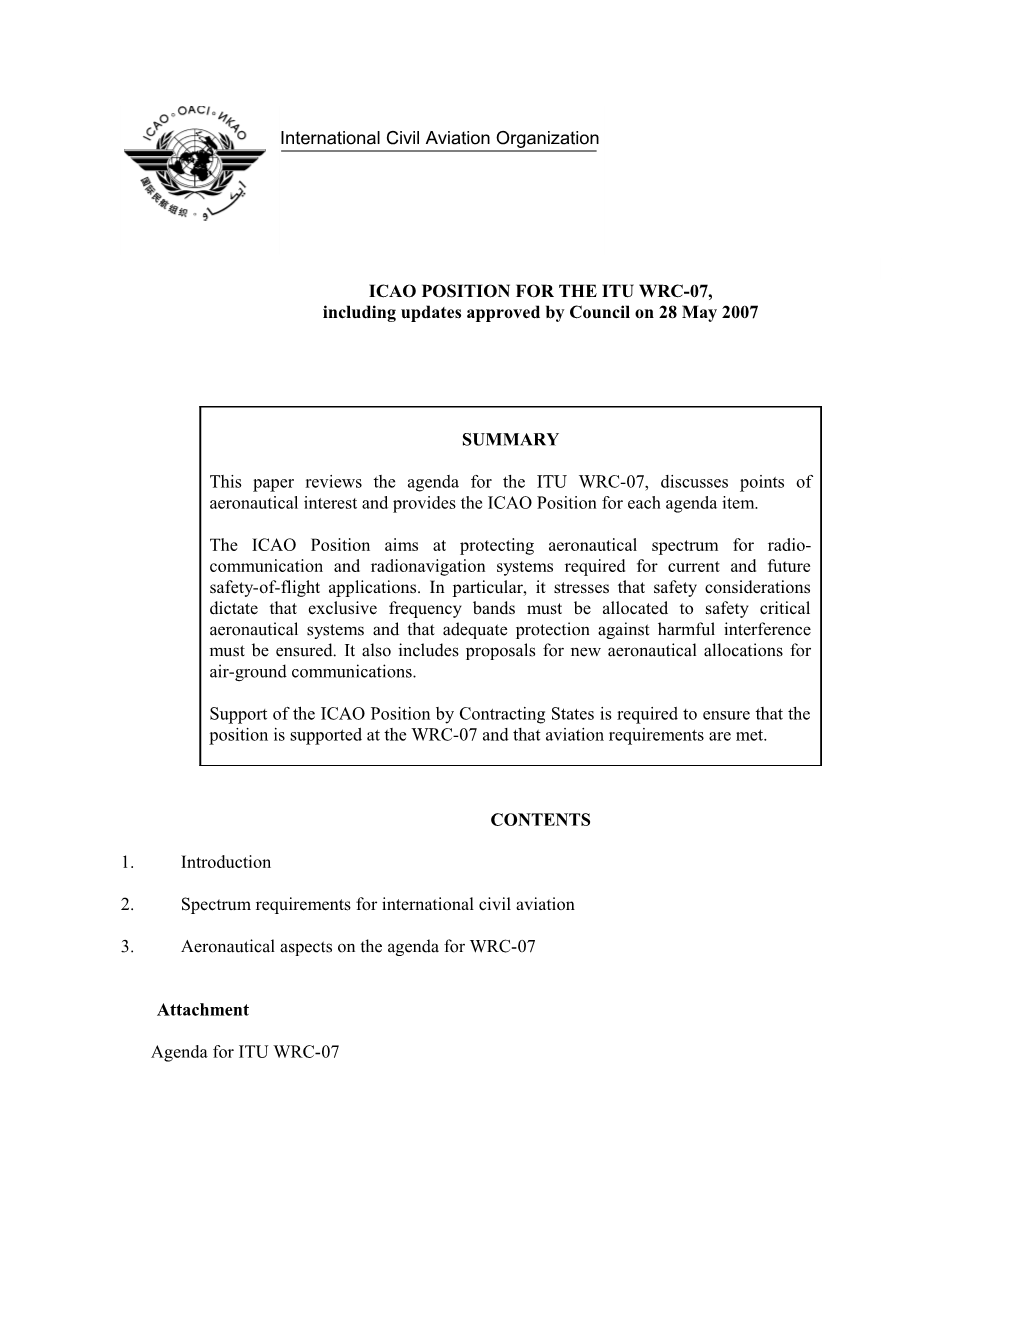 ICAO Position for the ITU WRC-07, As Approved by Council on 28 May 2007